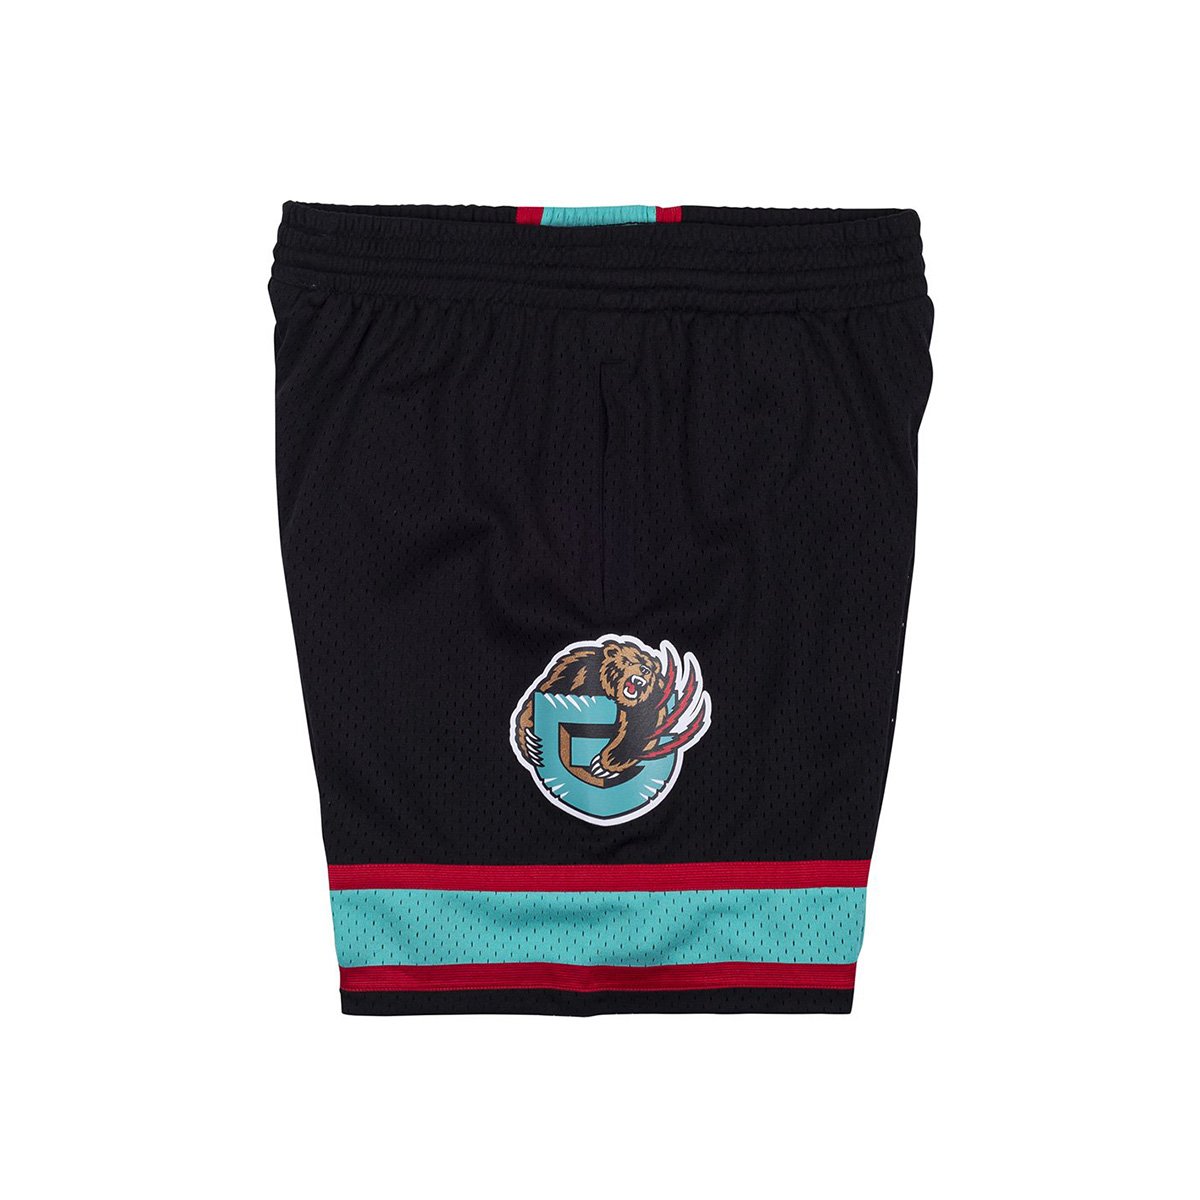 Mitchell & Ness Vancouver Grizzlies Teal Swingman Shorts - Gameday Detroit